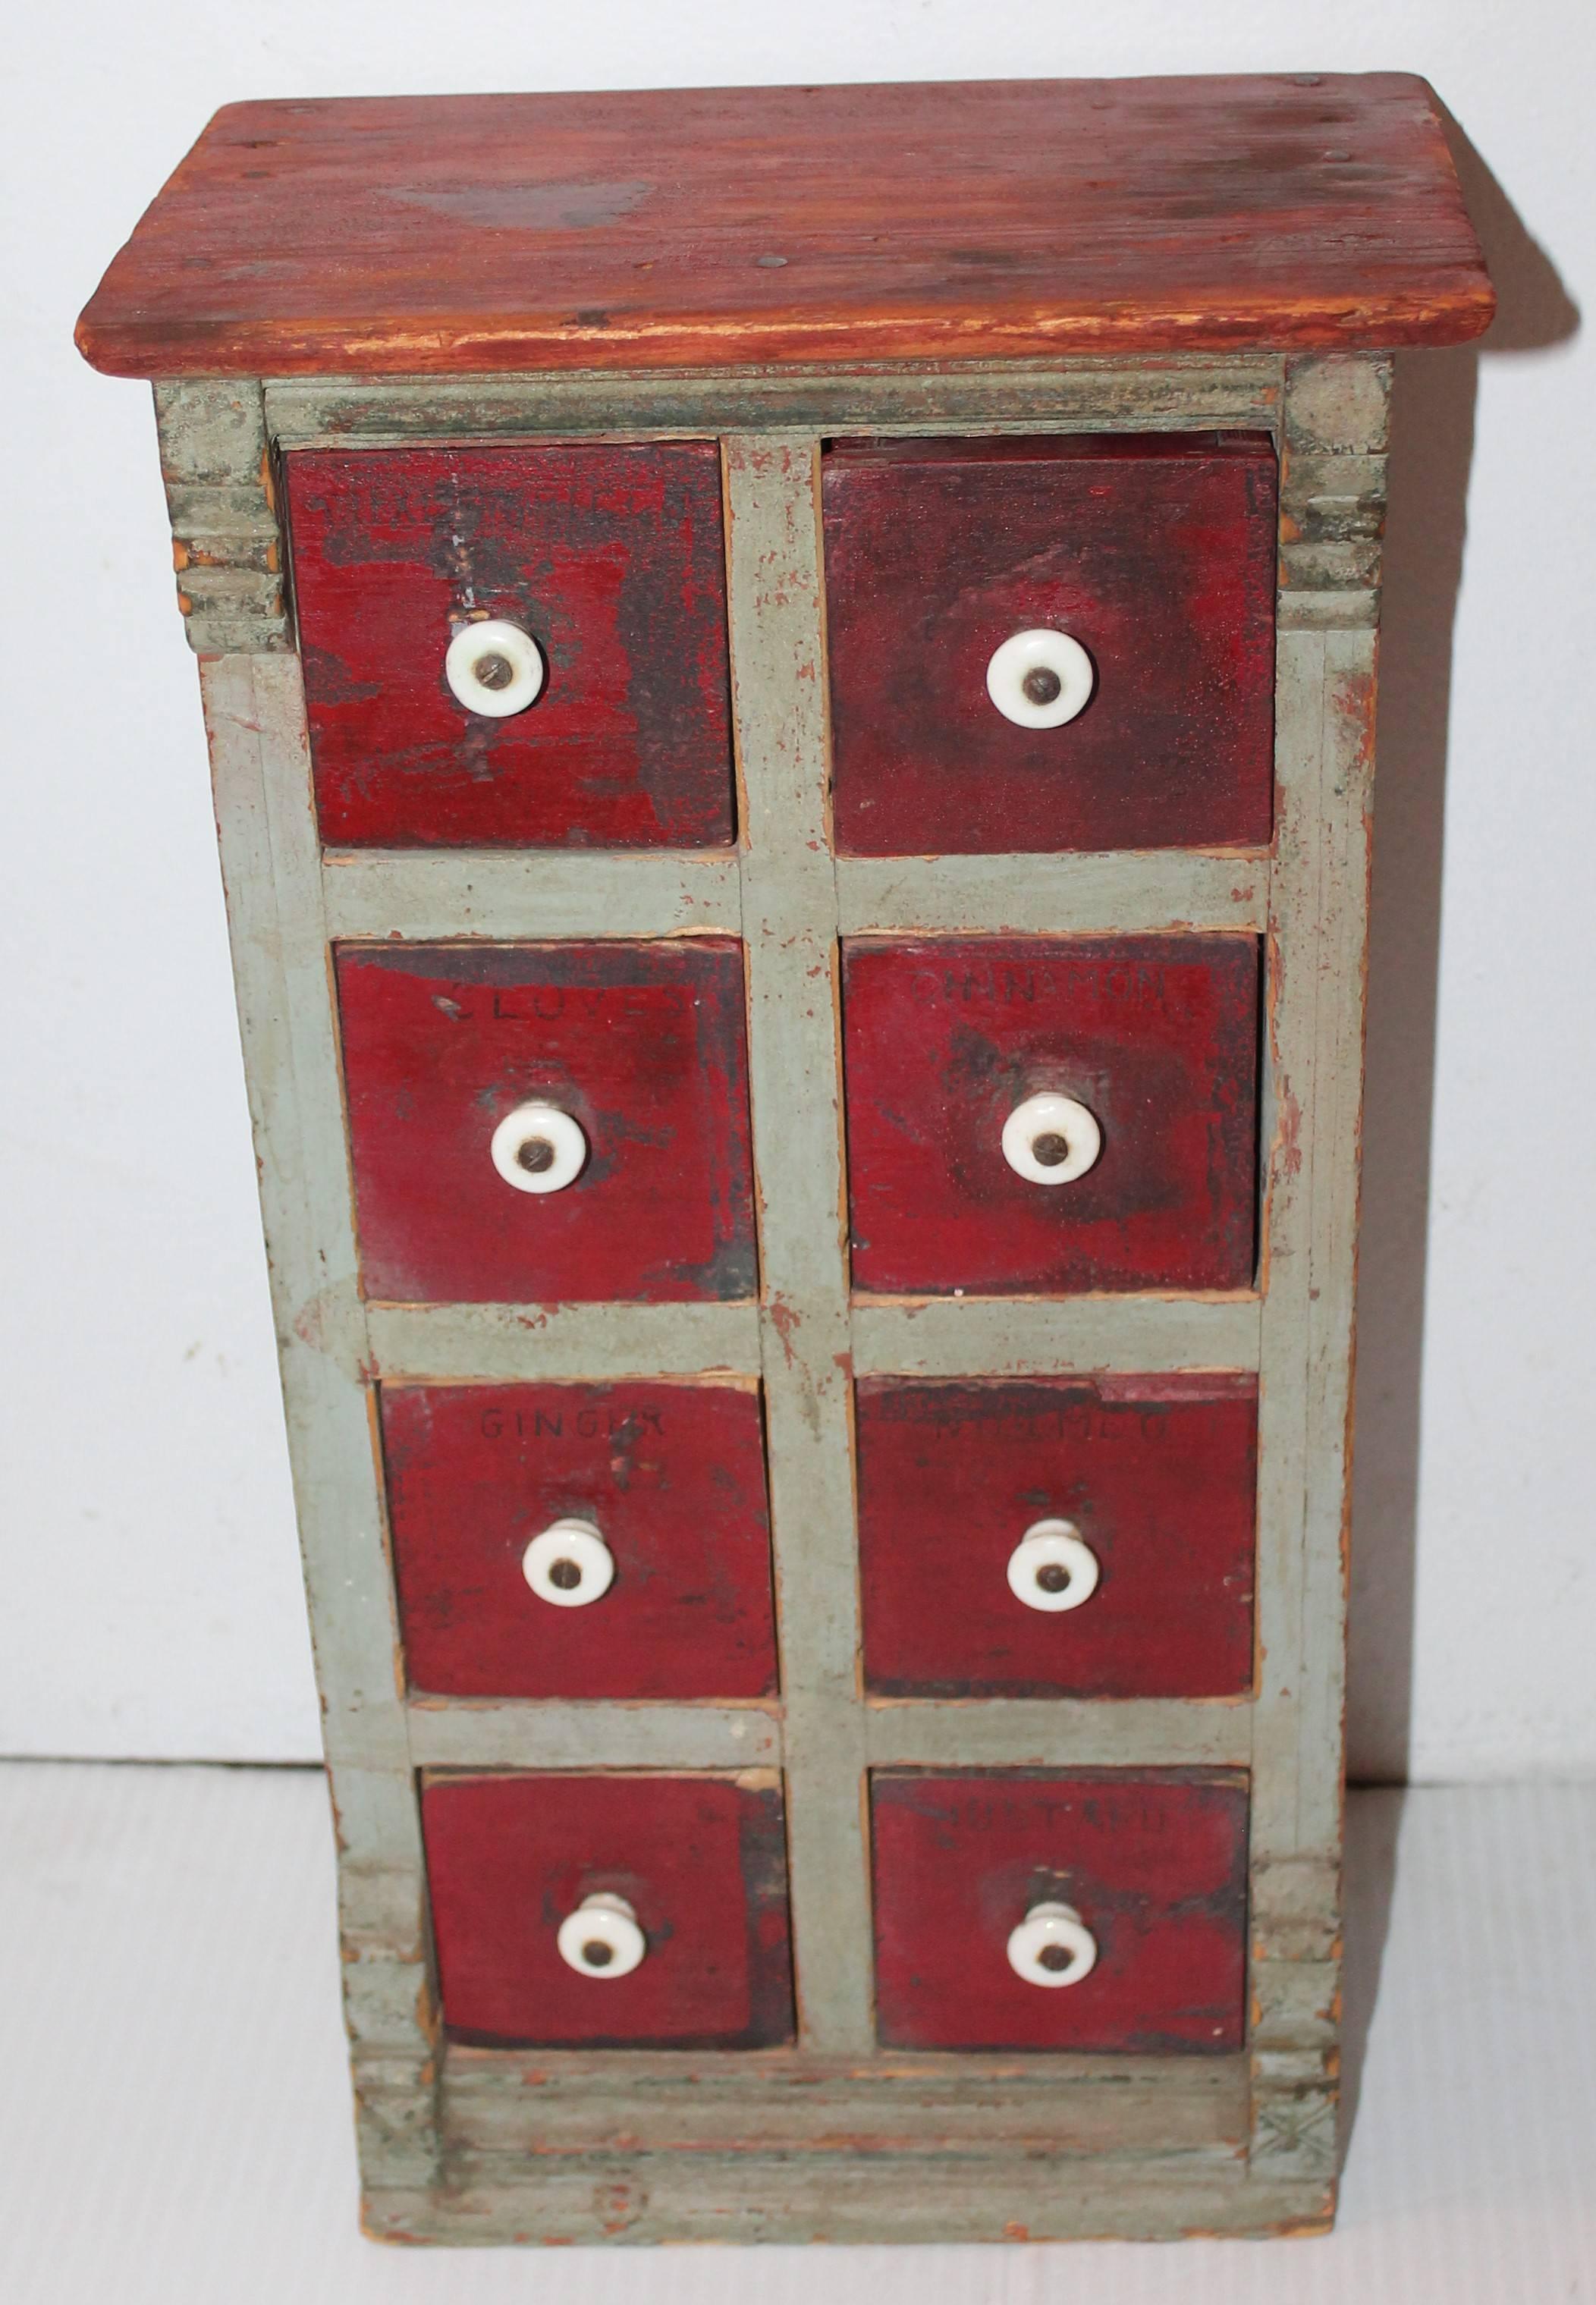 This amazing all original painted New England table top spice cabinet in red and grey is in great untouched surface. This eight-drawer cabinet is handmade and has spices painted on drawers. The condition is very good.